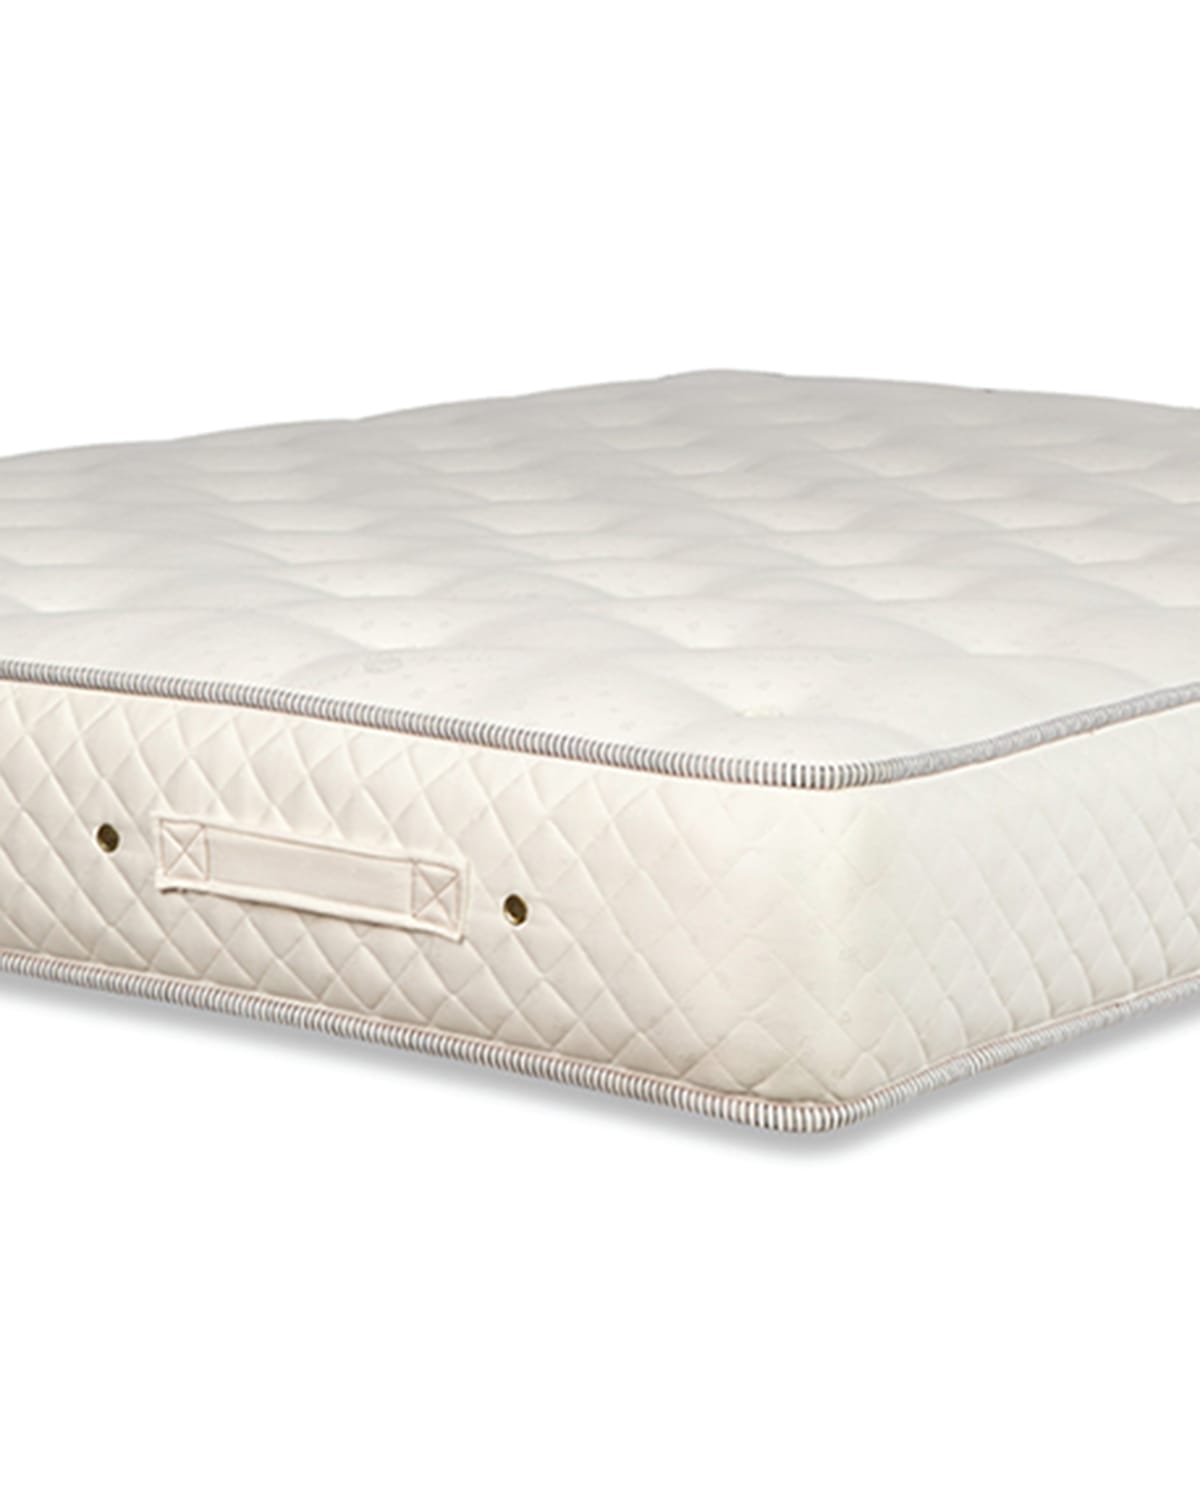 Royal-pedic Dream Spring Limited Firm Queen Mattress In White